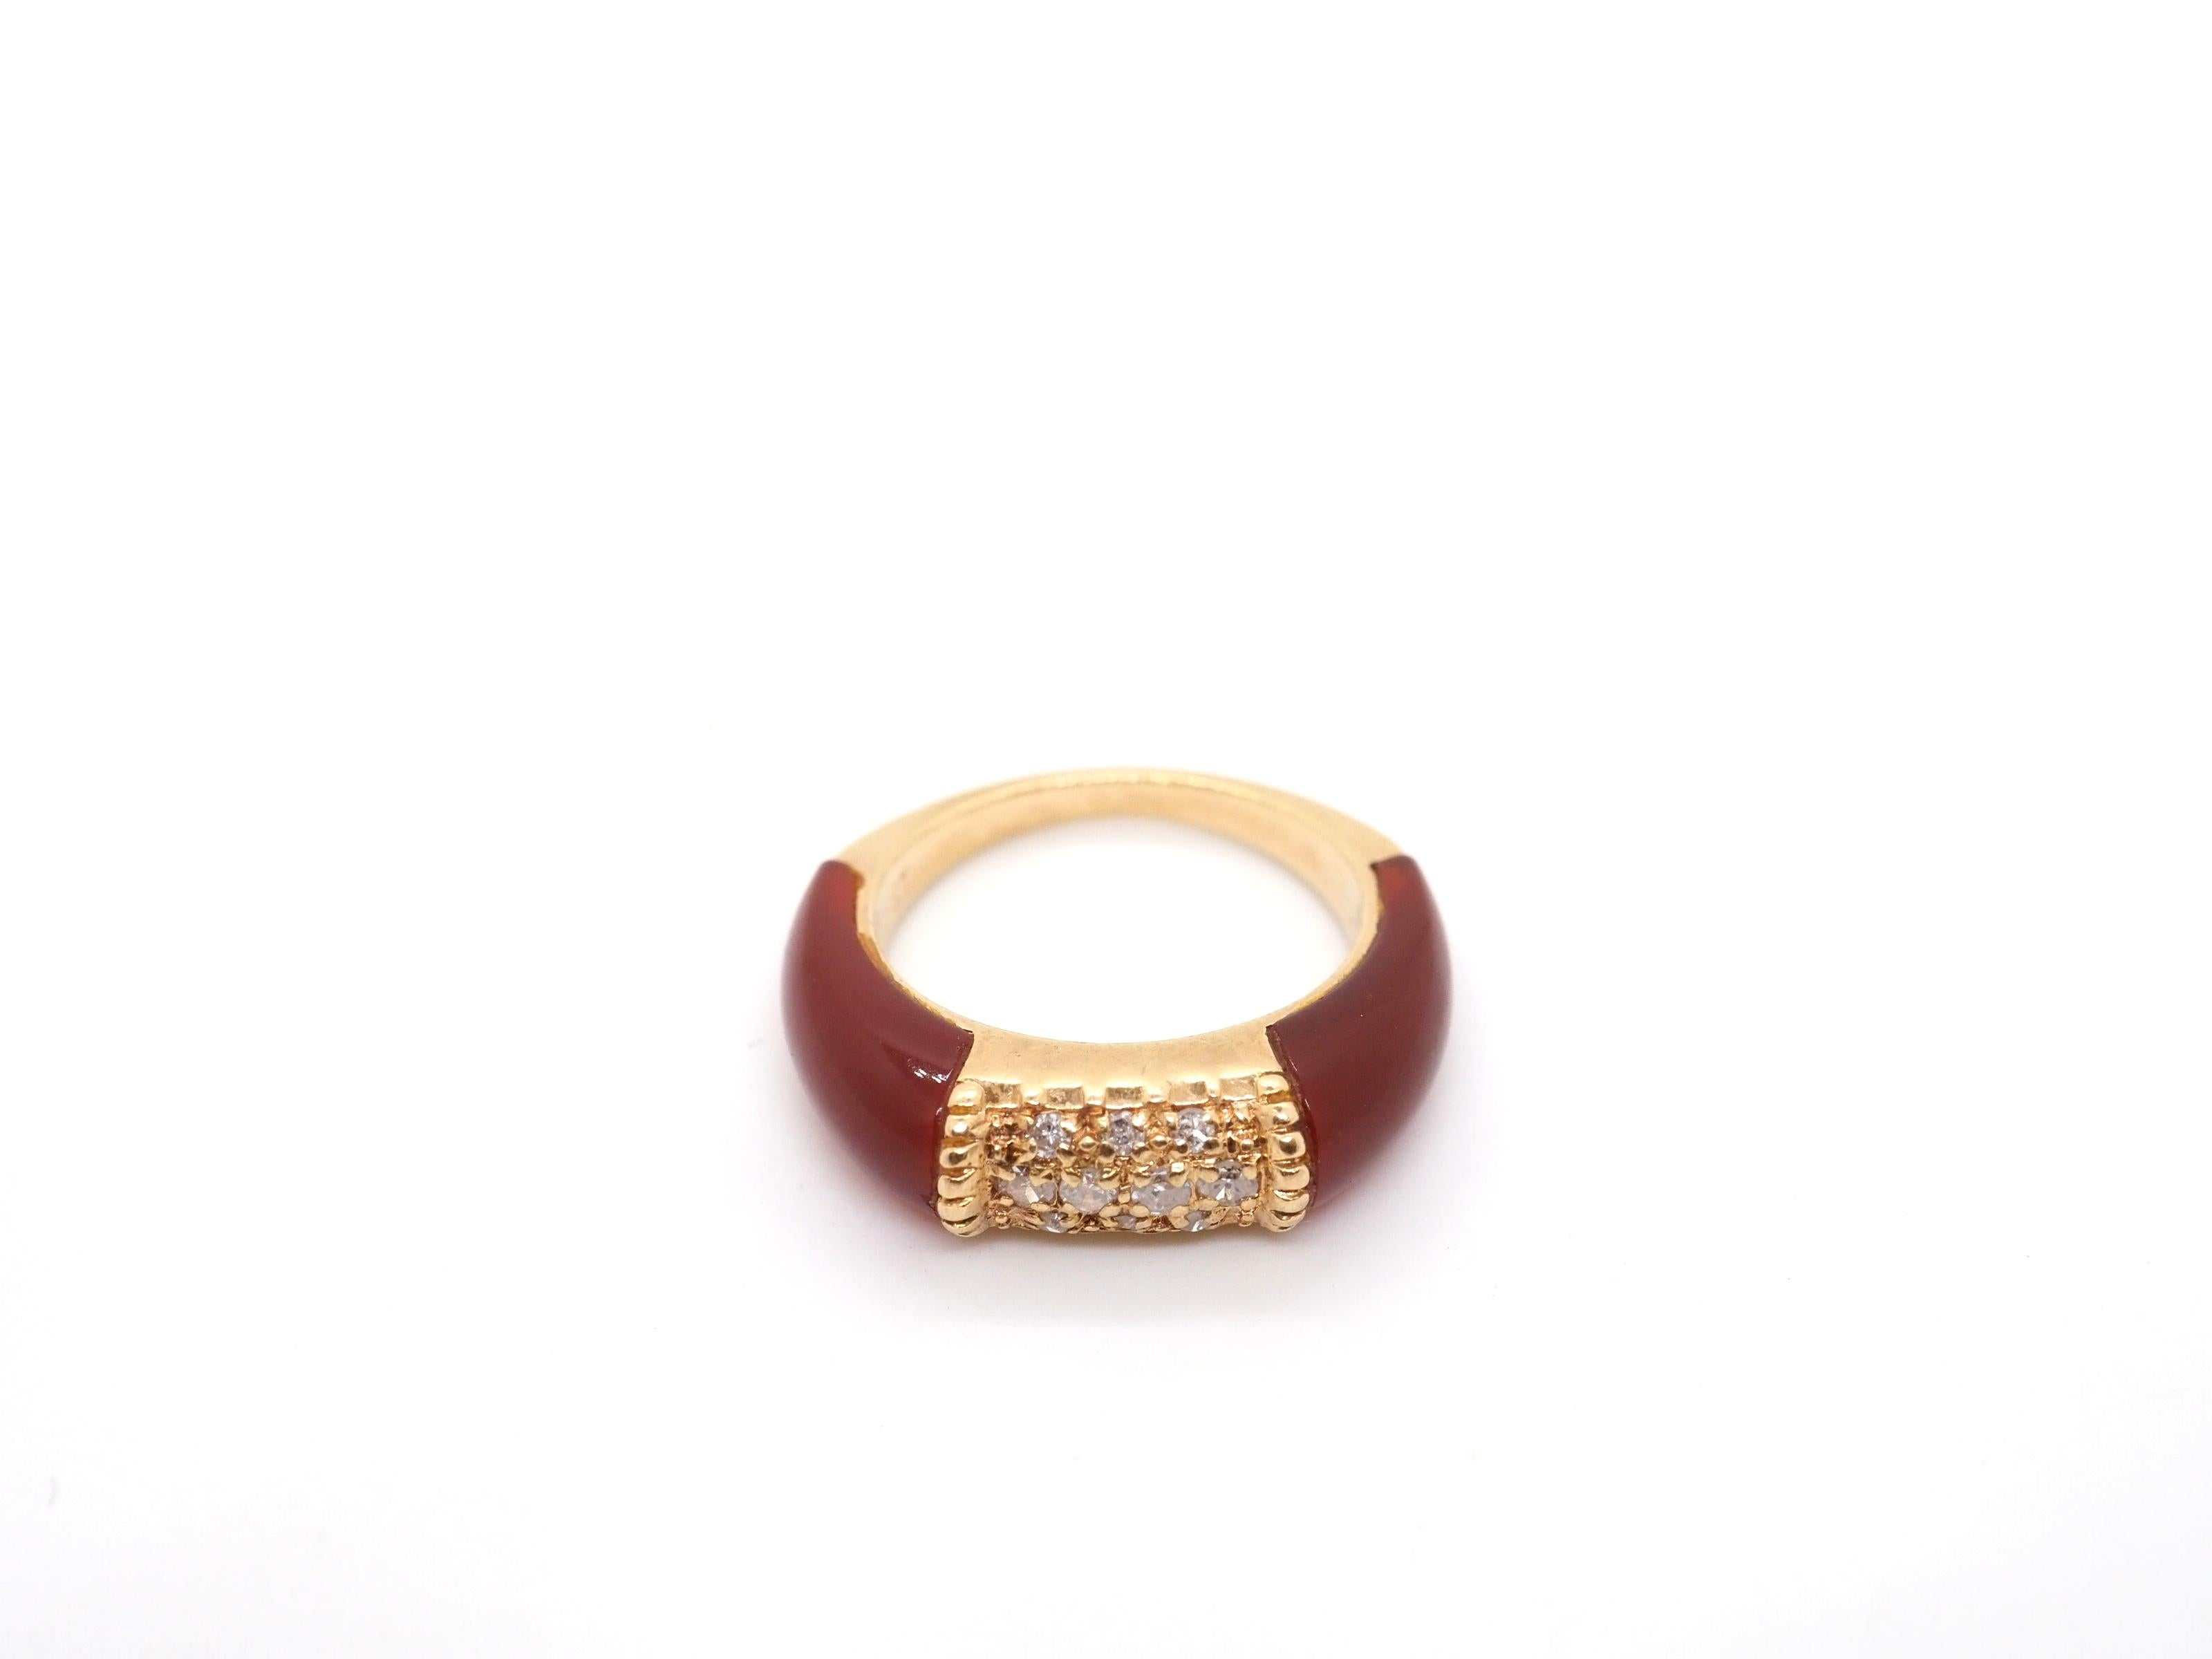 Step into the world of vintage elegance with this exquisite Vintage Ring crafted in 14k yellow gold. This stunning piece captures the essence of a bygone era, showcasing intricate details and a timeless design.

The vintage-inspired setting is